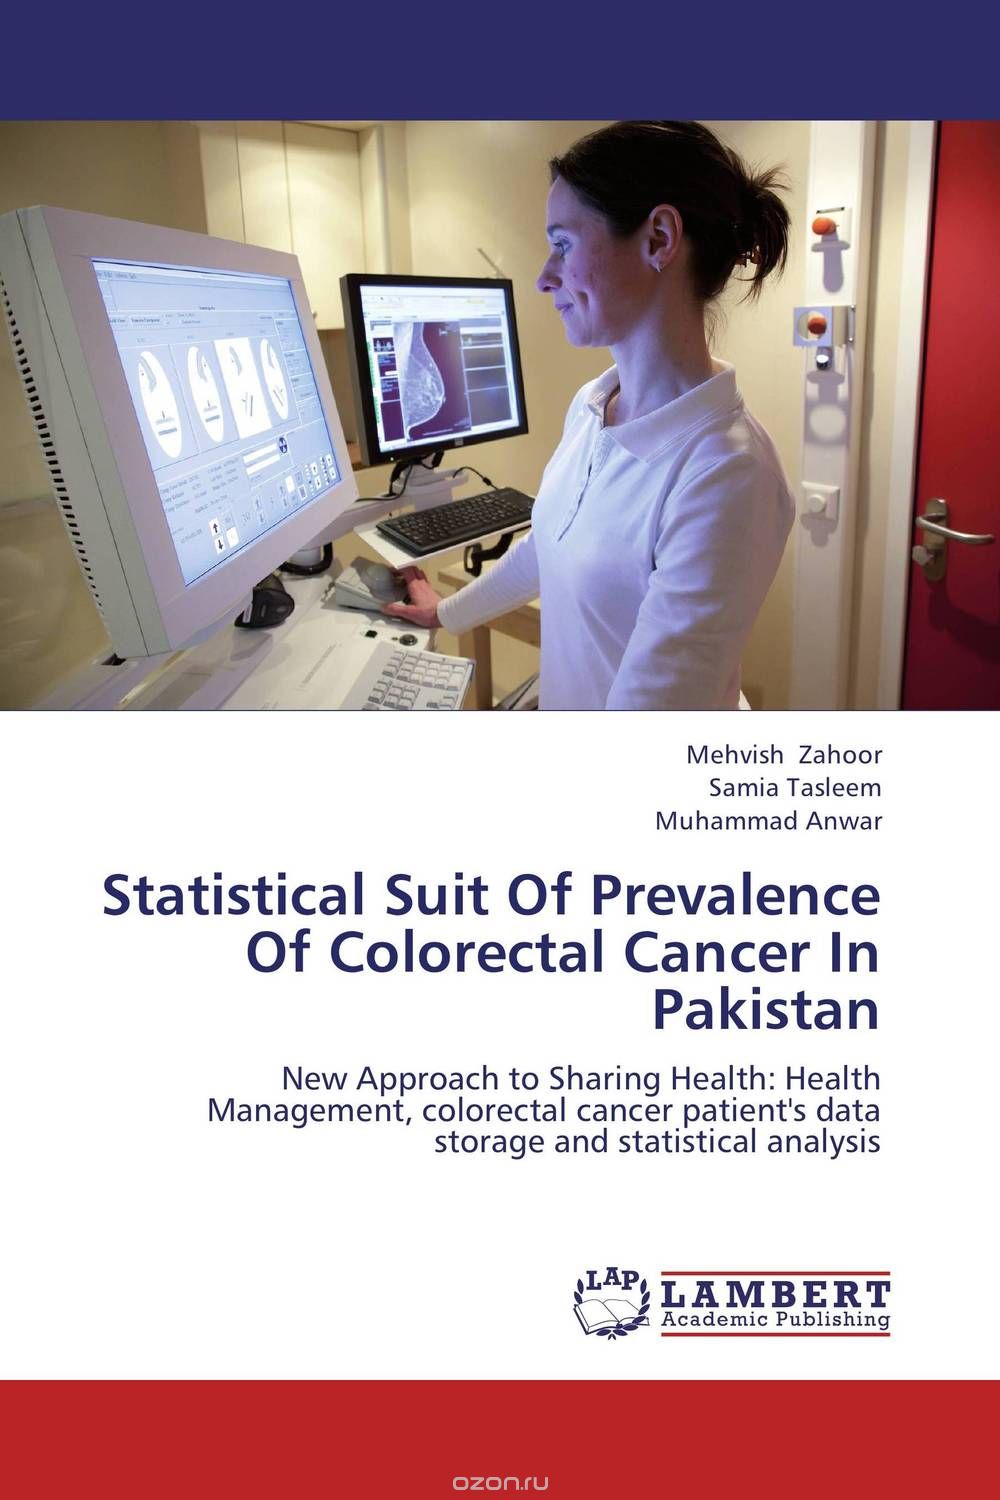 Скачать книгу "Statistical Suit Of Prevalence Of Colorectal Cancer In Pakistan"